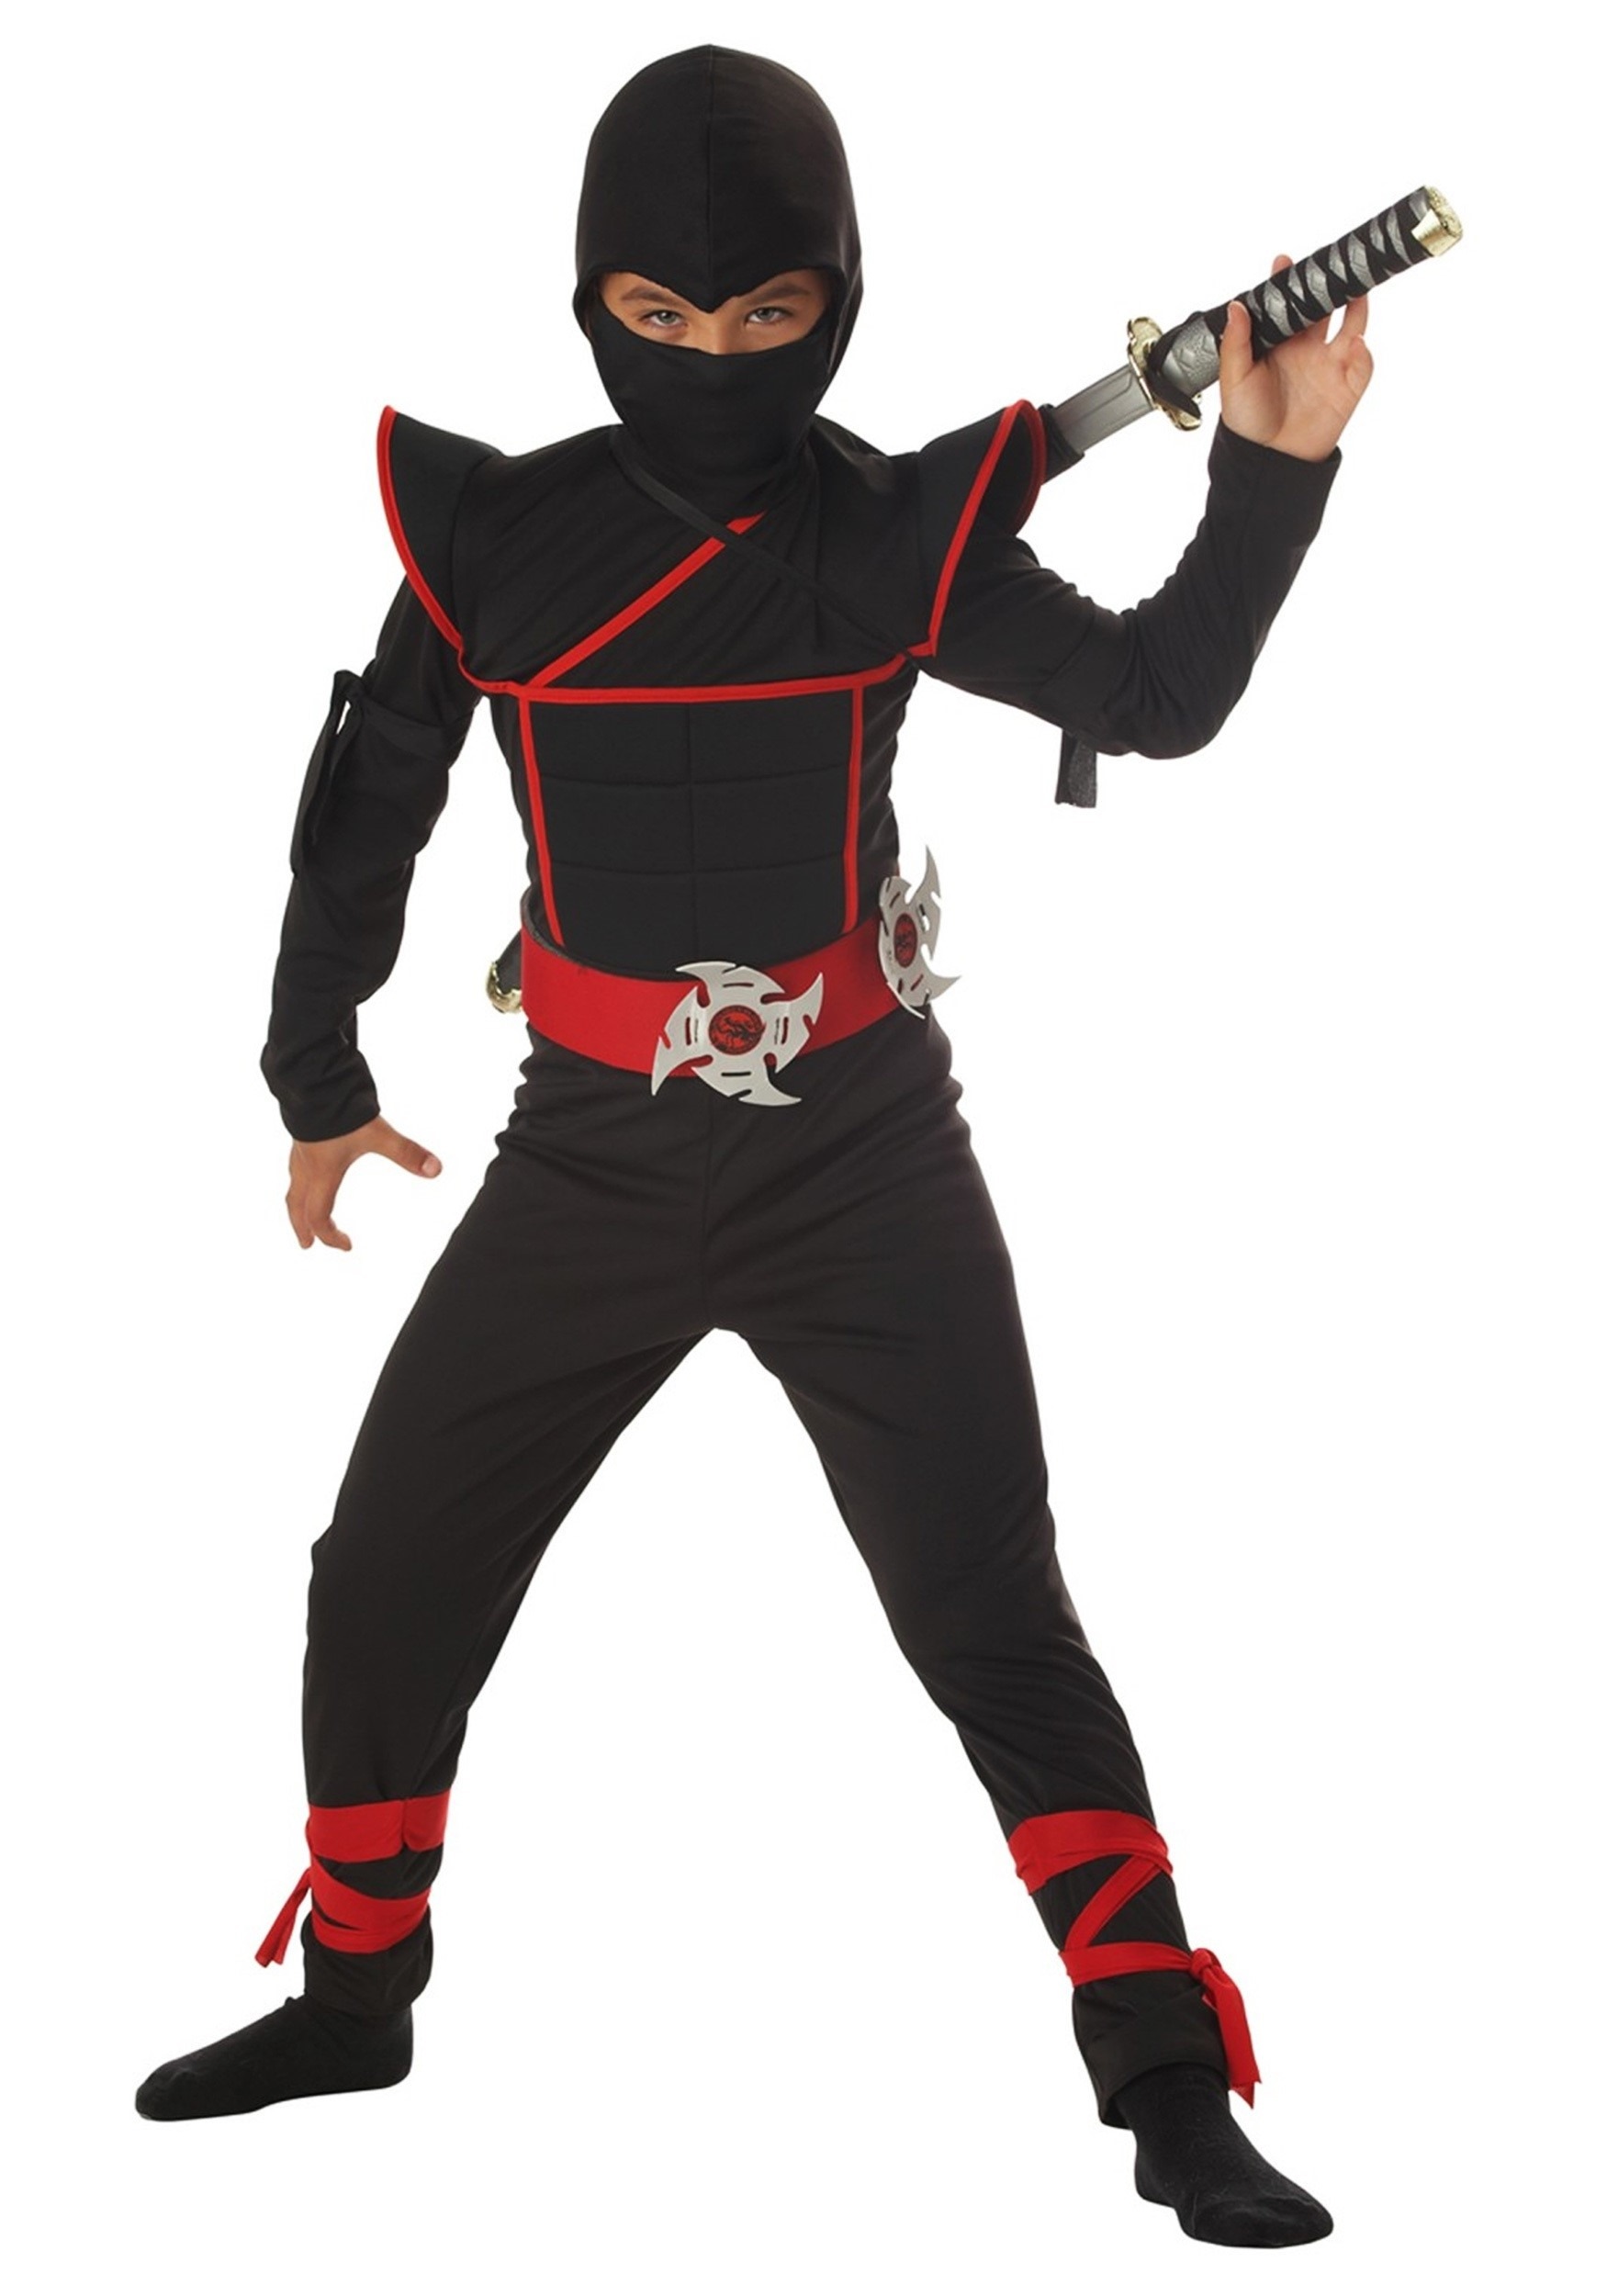 Photos - Fancy Dress California Costume Collection Stealth Ninja Costume for Kids Black/Red 